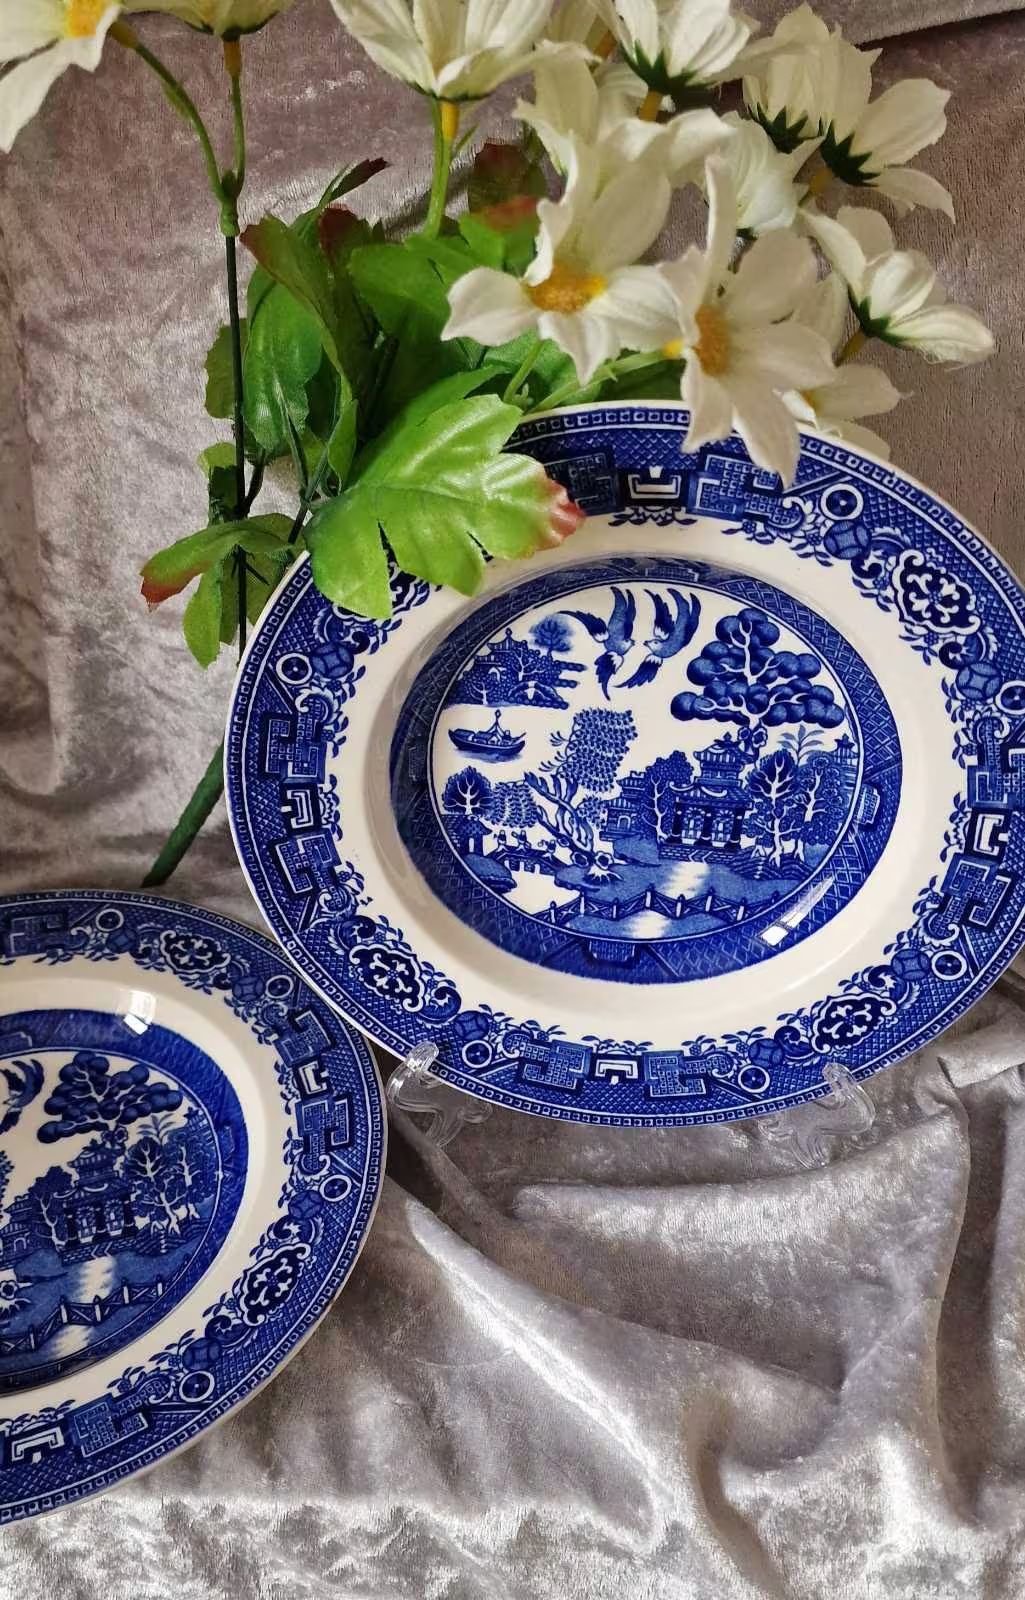 Blue and white plate with landscape scene, featuring Alfred Meakin old Willow dinner plates.